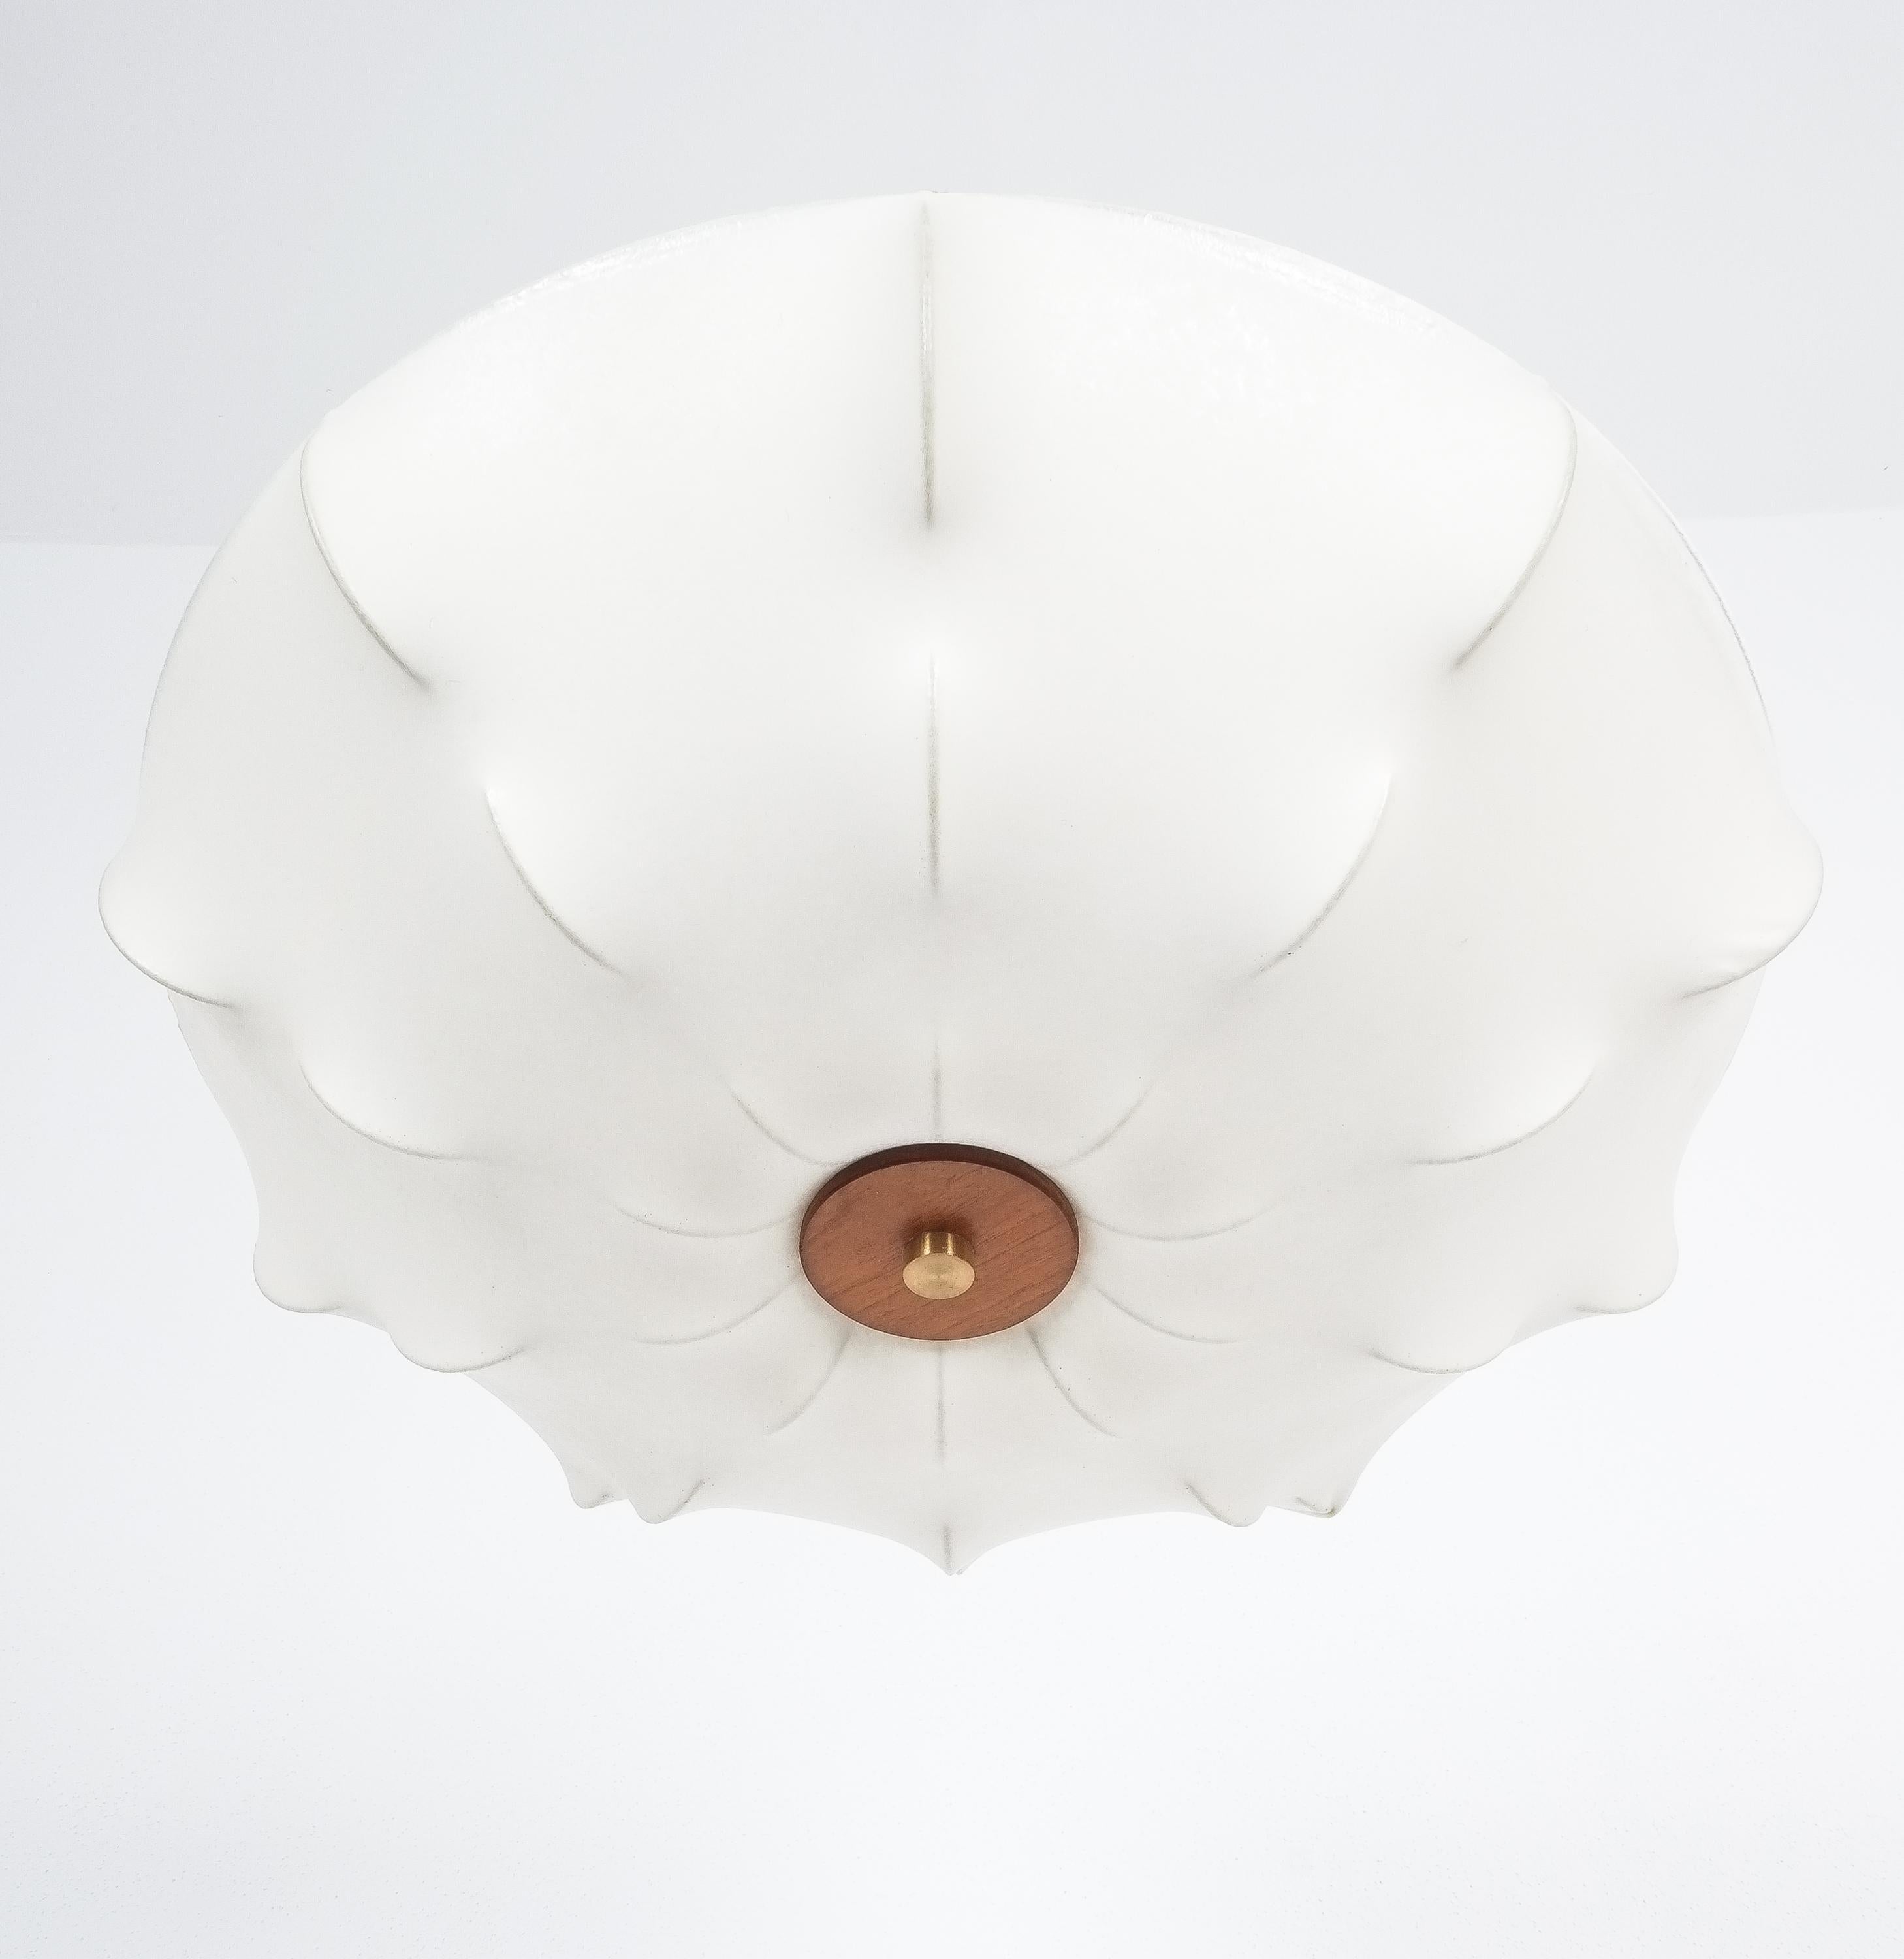 Midcentury white resin cocoon flush mount, Italy, circa 1970

Very well preserved biomorphic flush mount lamp. The lampshade is made of a cocoon type fabric and the rack is made of metal. A wooden ring and a large brass screw hold the shade in